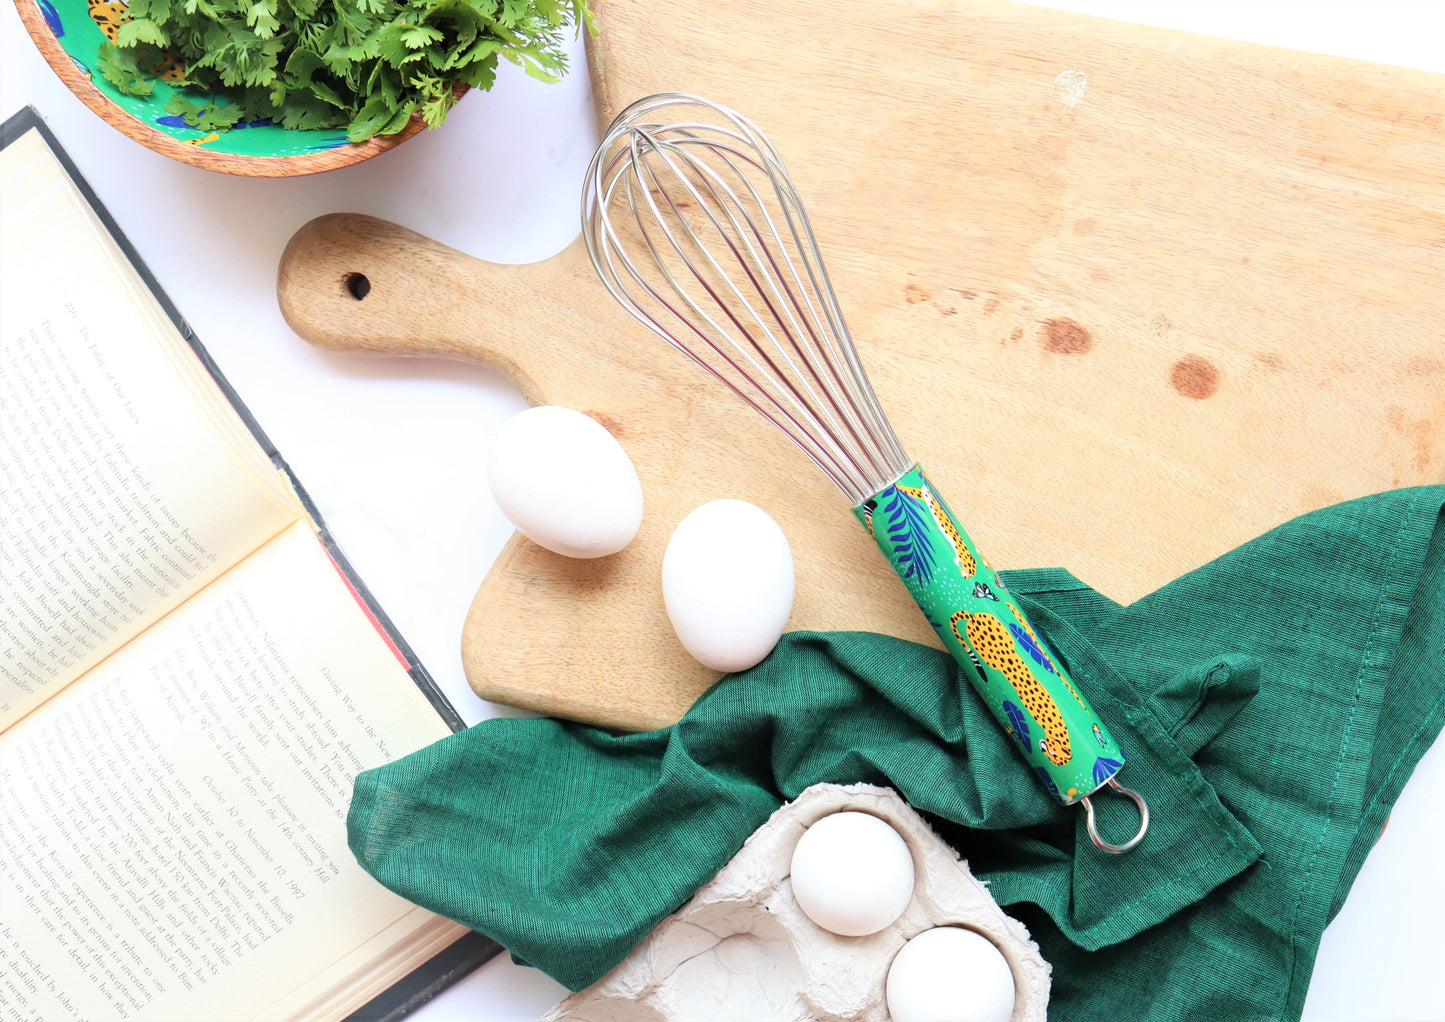 Baking gift set - Hand whisk and set of 2 kitchen towels - Wire whisk - Tea towels set - Fierce